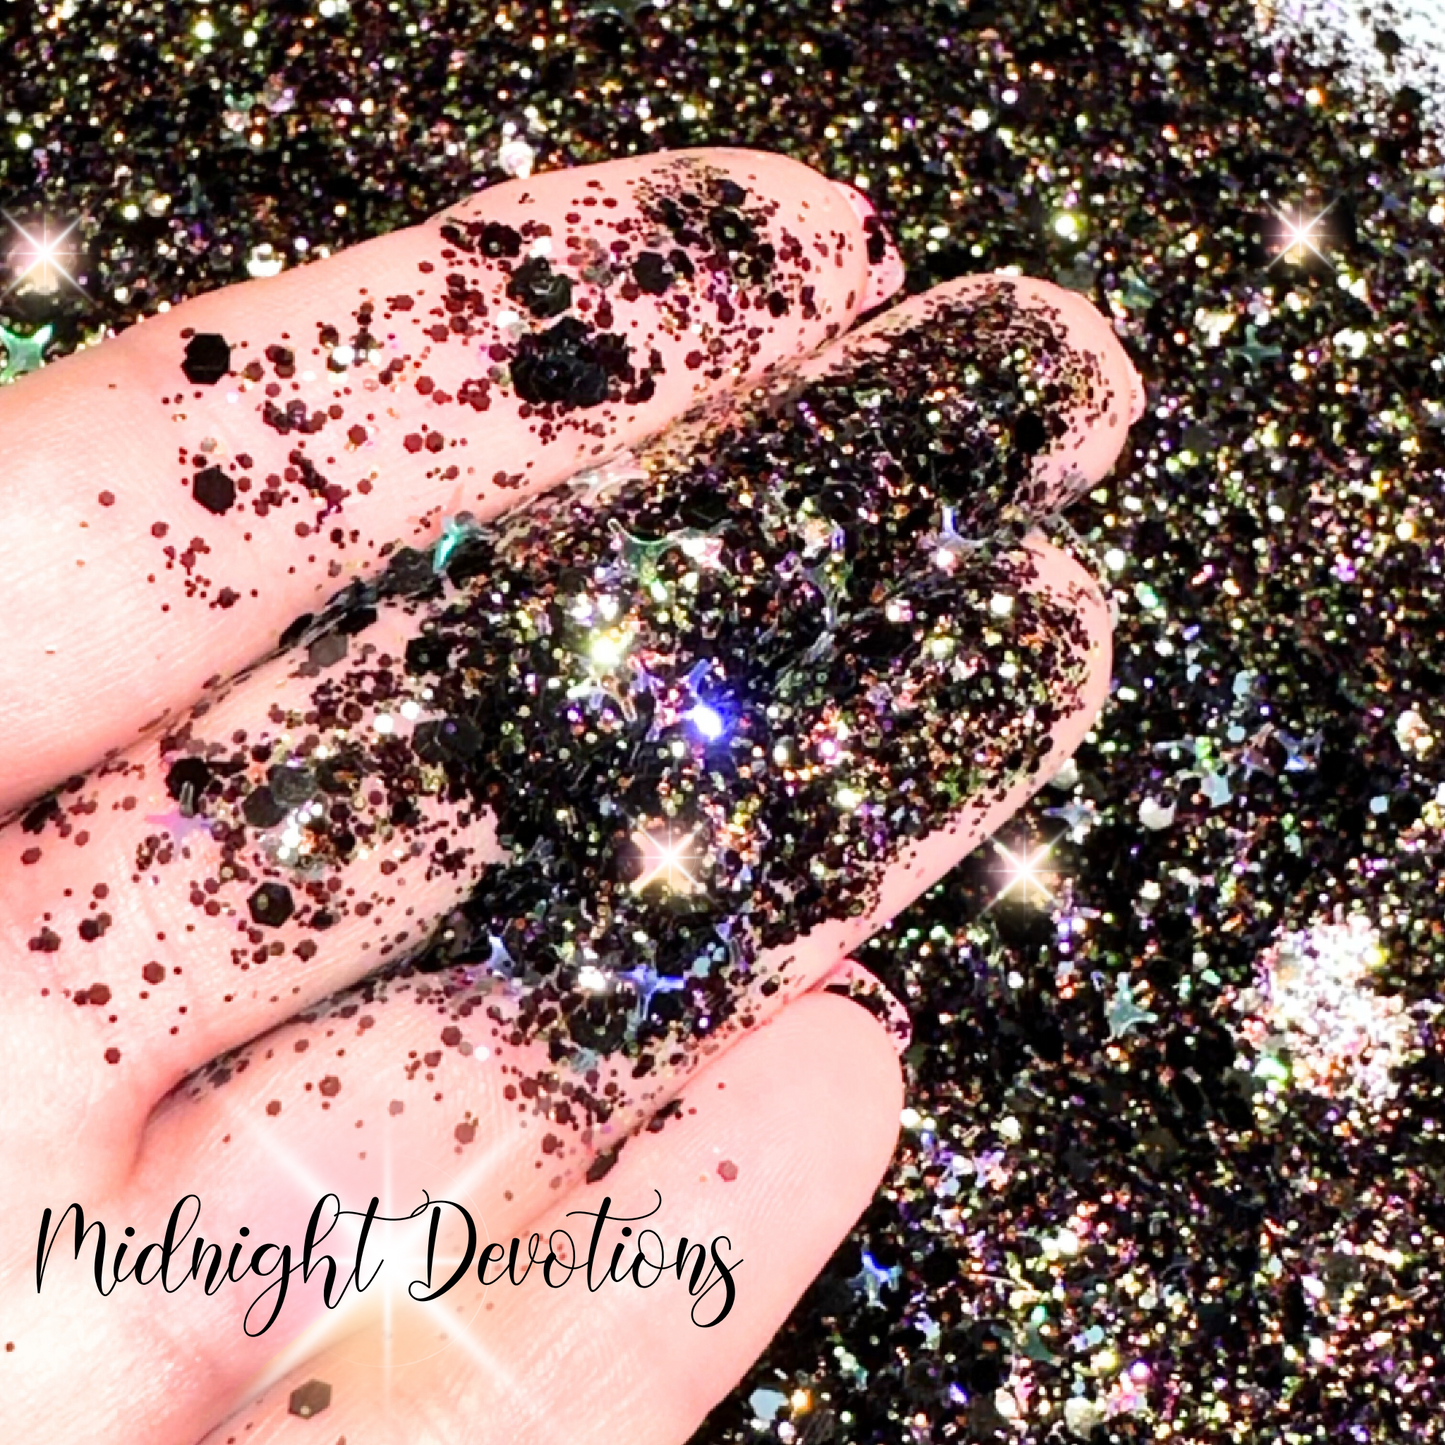 Midnight Devotions Chunky Glitter Mix with Shapes